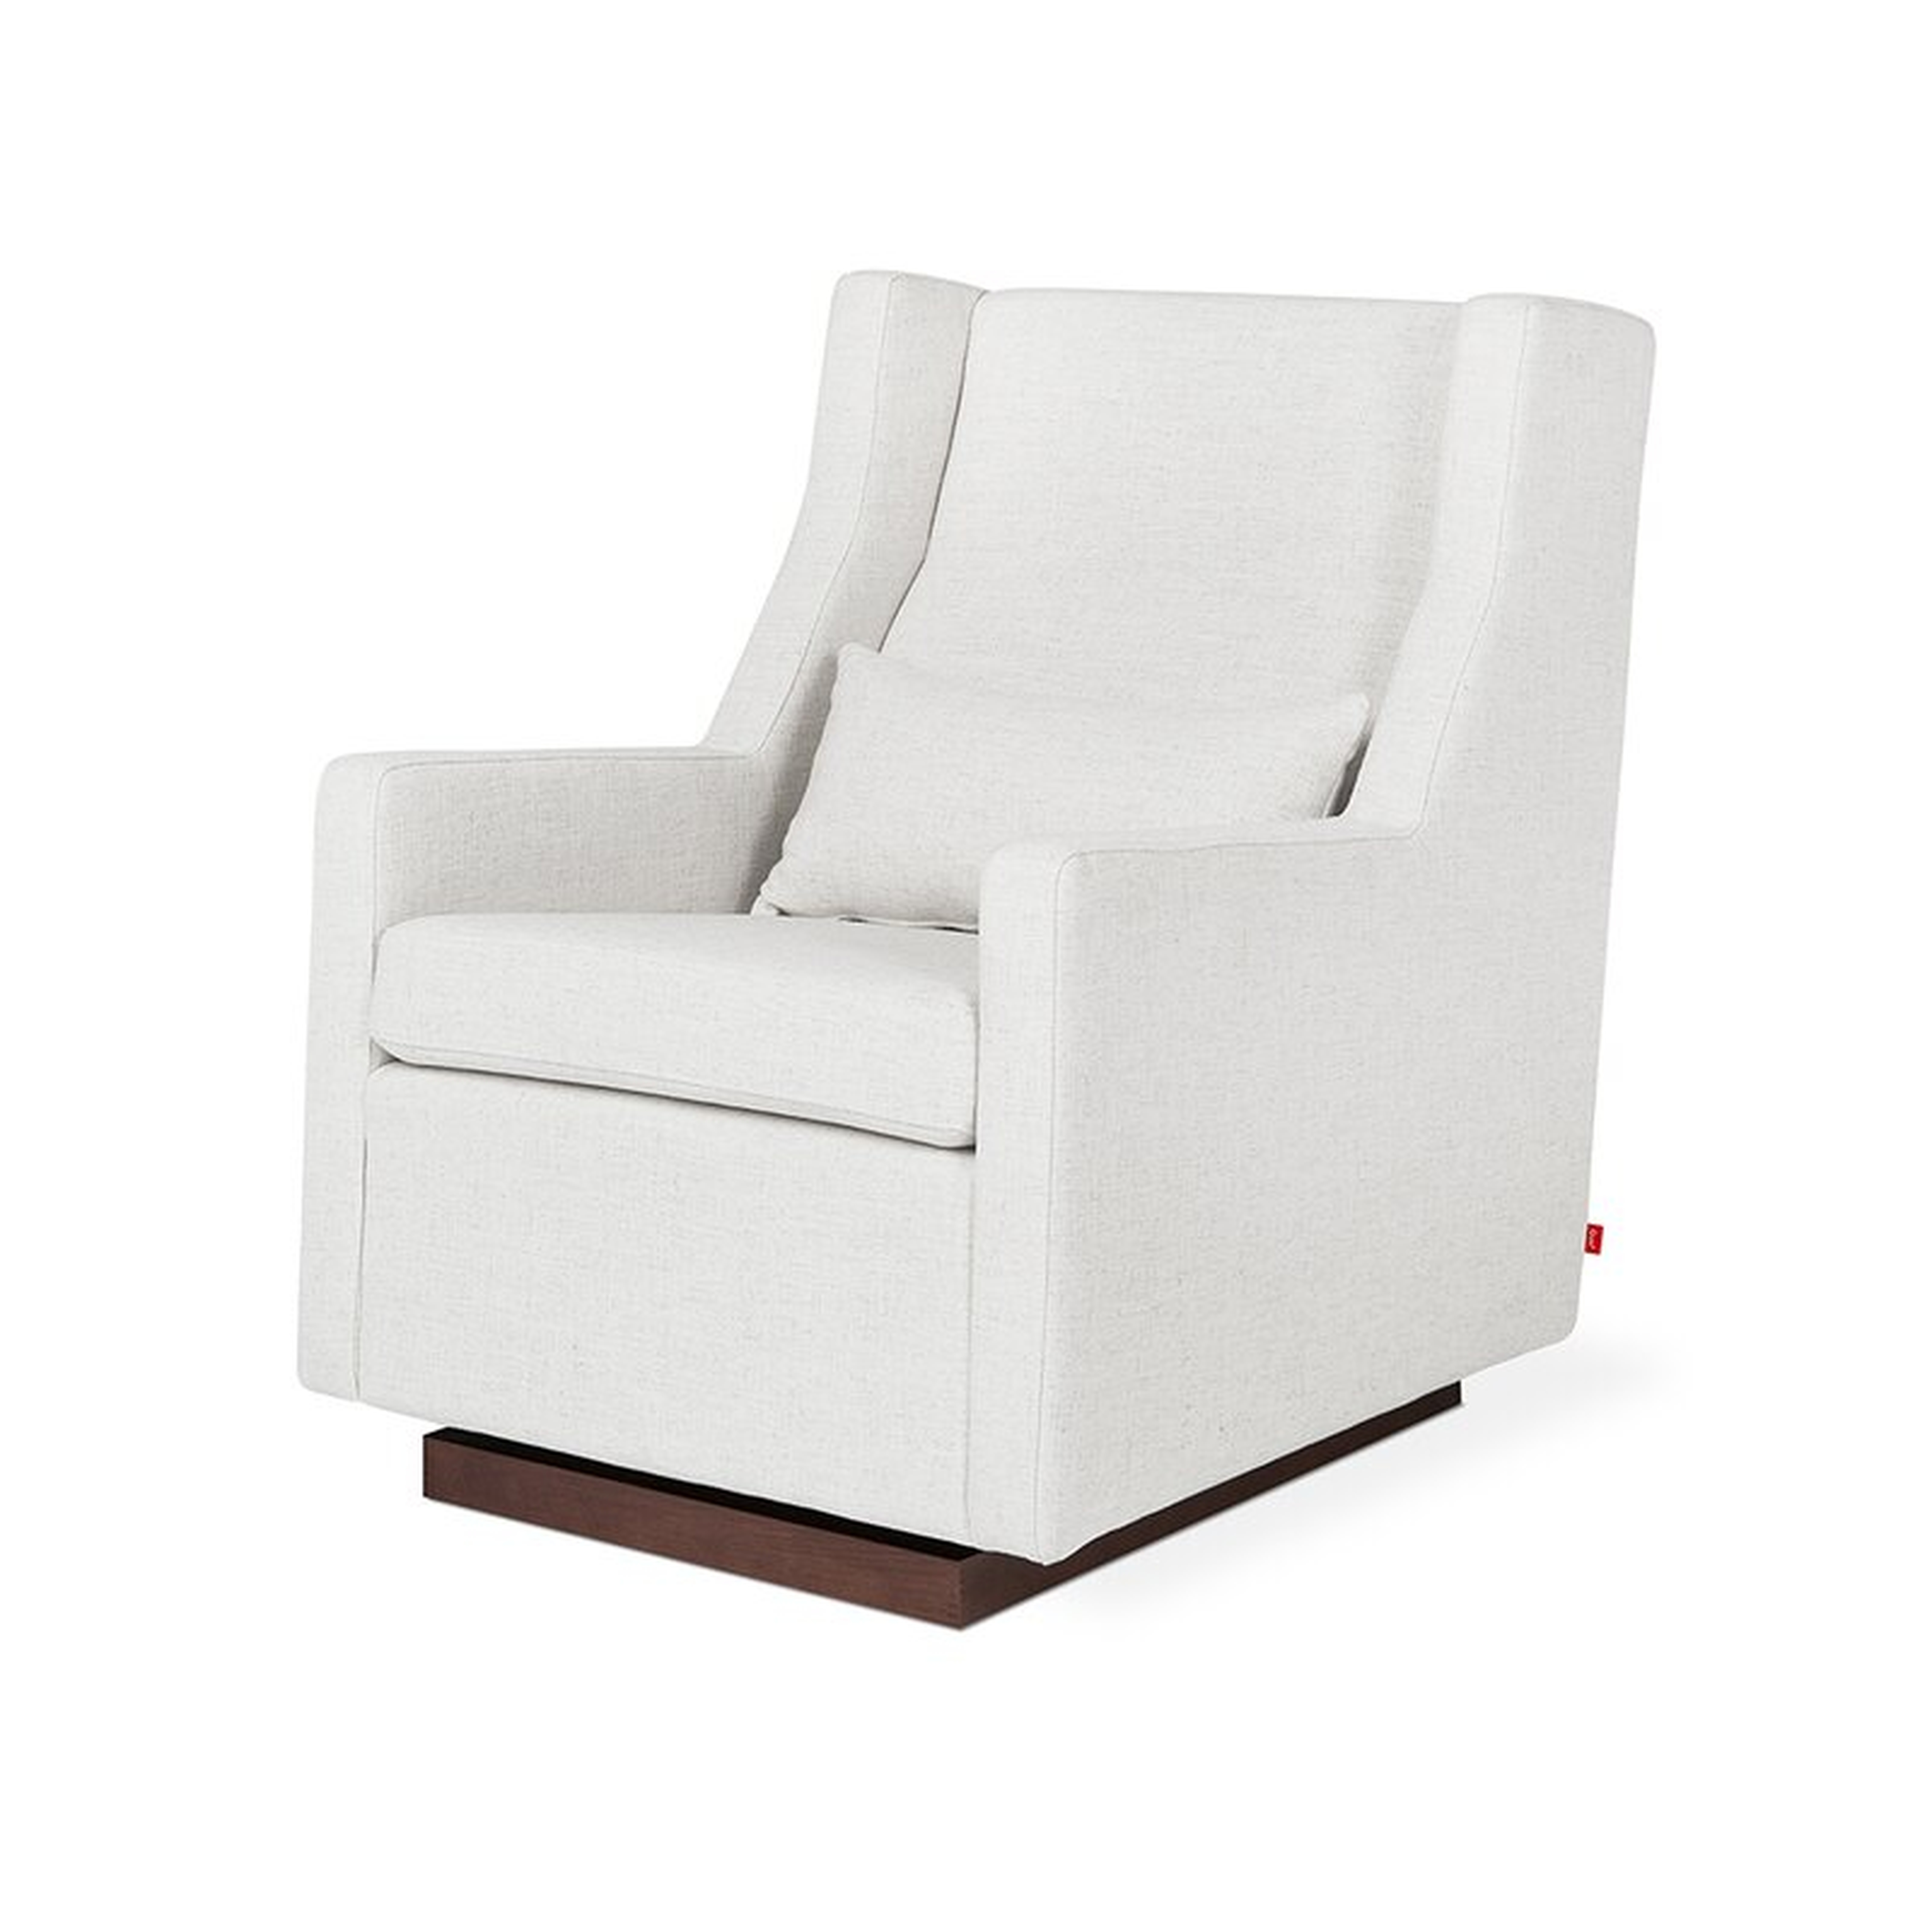 Gus* Modern Sparrow Glider Upholstery: Huron Ivory - Perigold